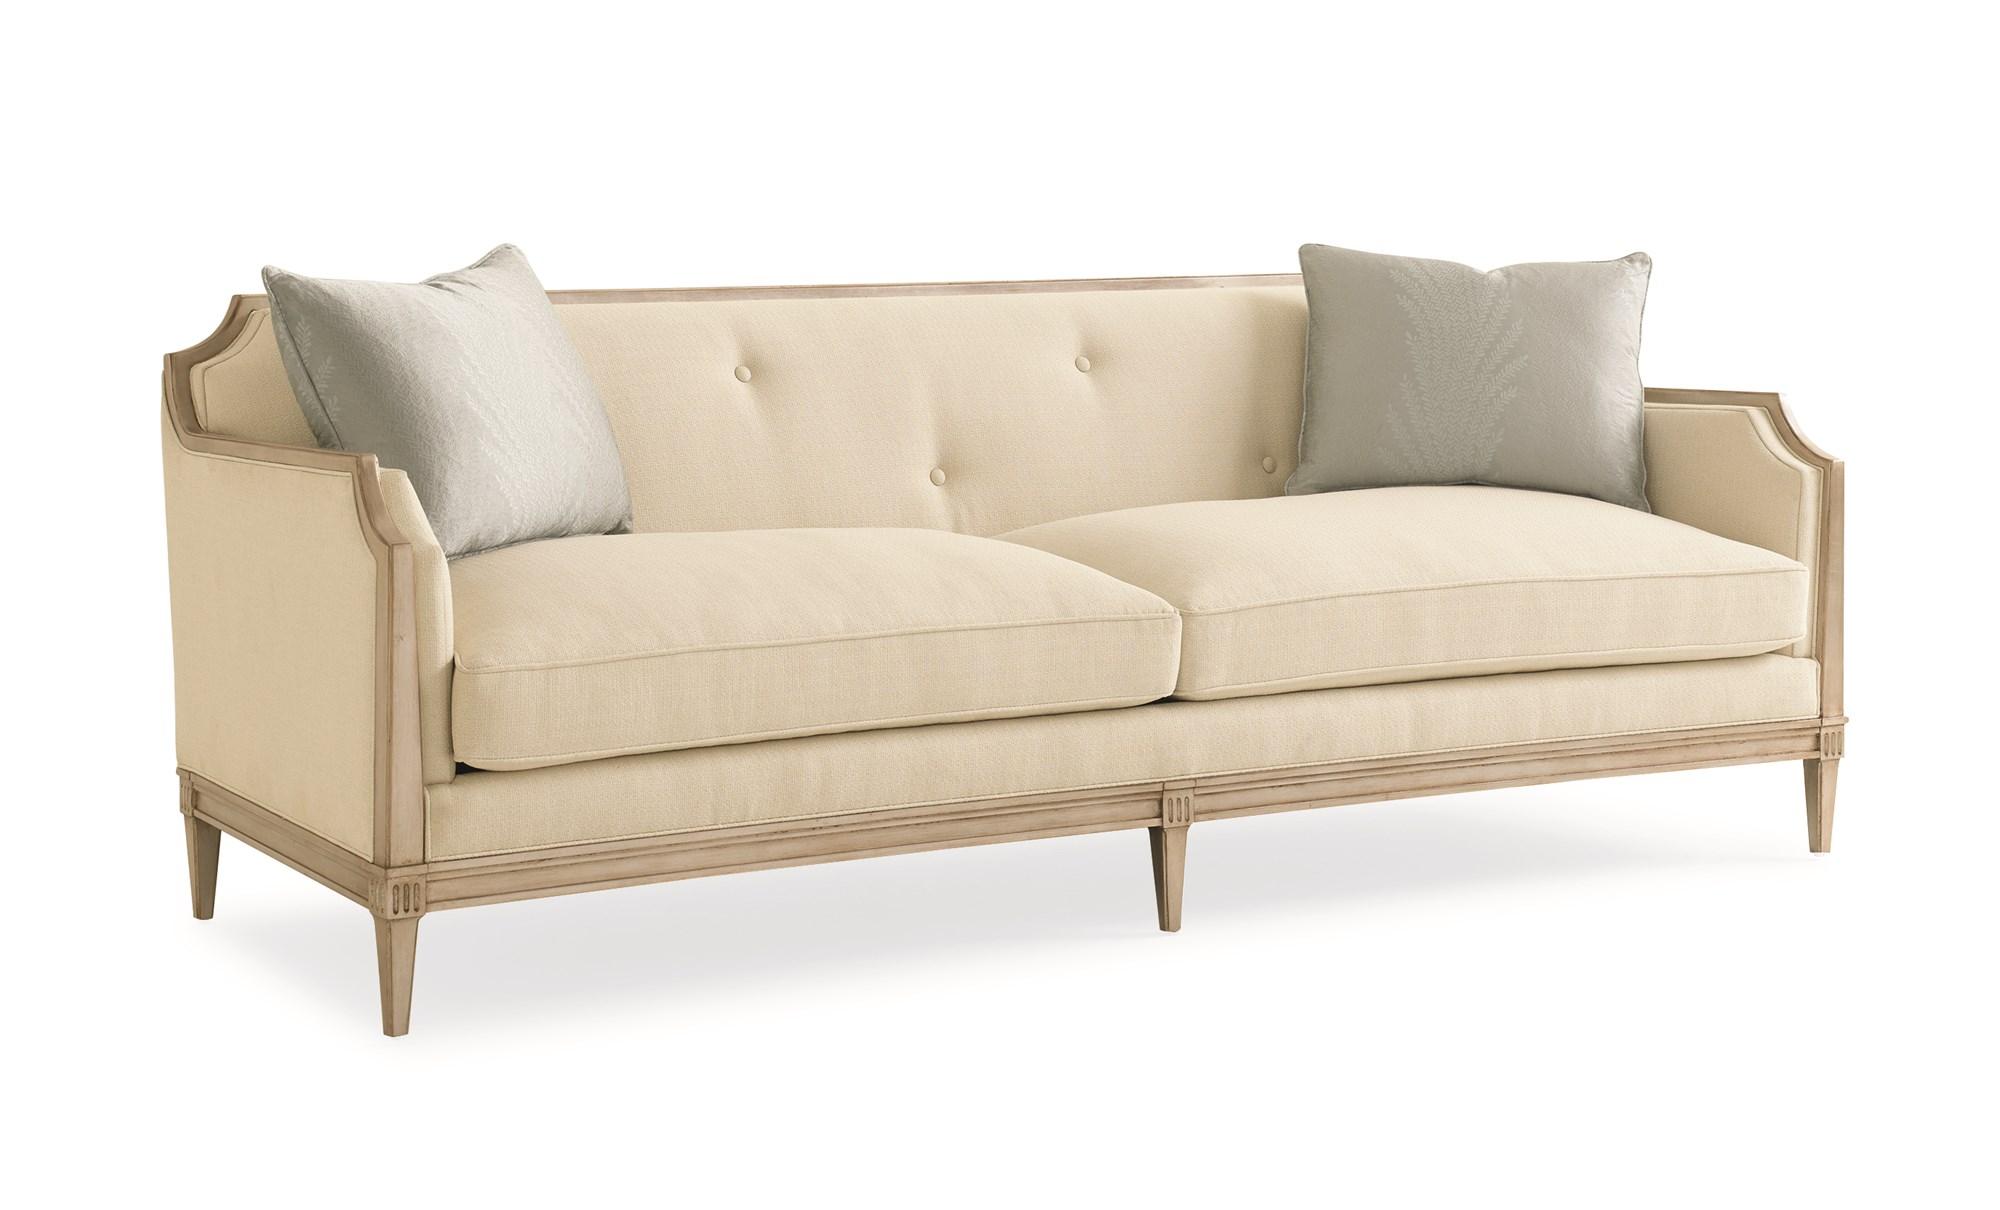 

    
Textured Ivory Fabric & Matte Pearl Wood Frame Sofa Set 2Pcs FRAME OF REFERENCE by Caracole
